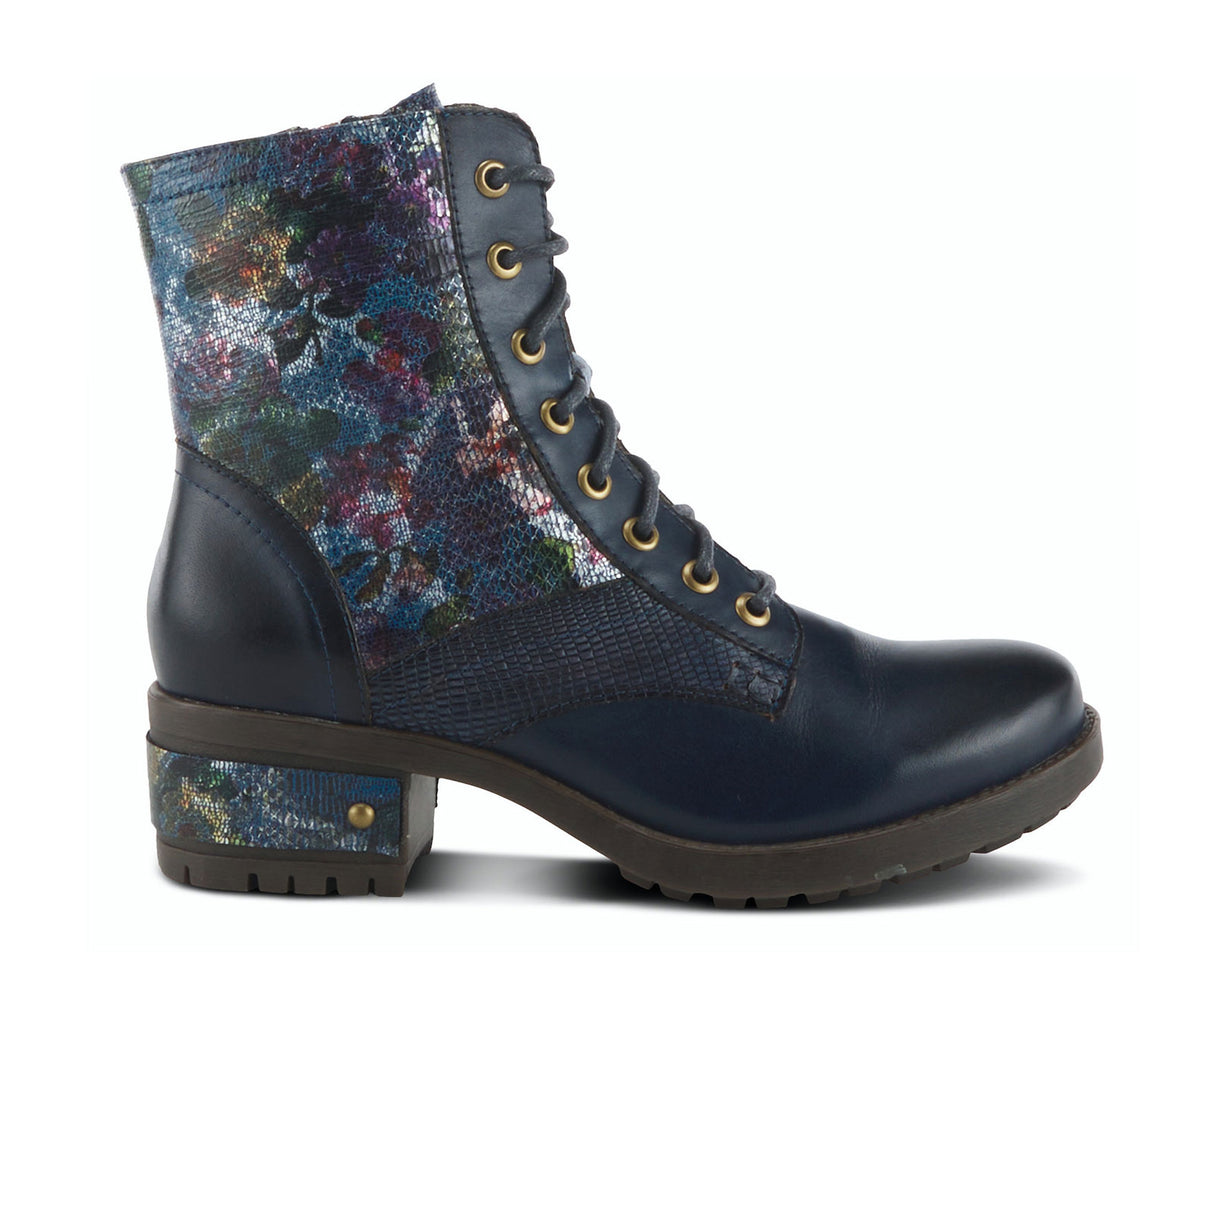 L'Artiste Marty Met Ankle Boot (Women) - Navy Multi Boots - Fashion - Ankle Boot - The Heel Shoe Fitters